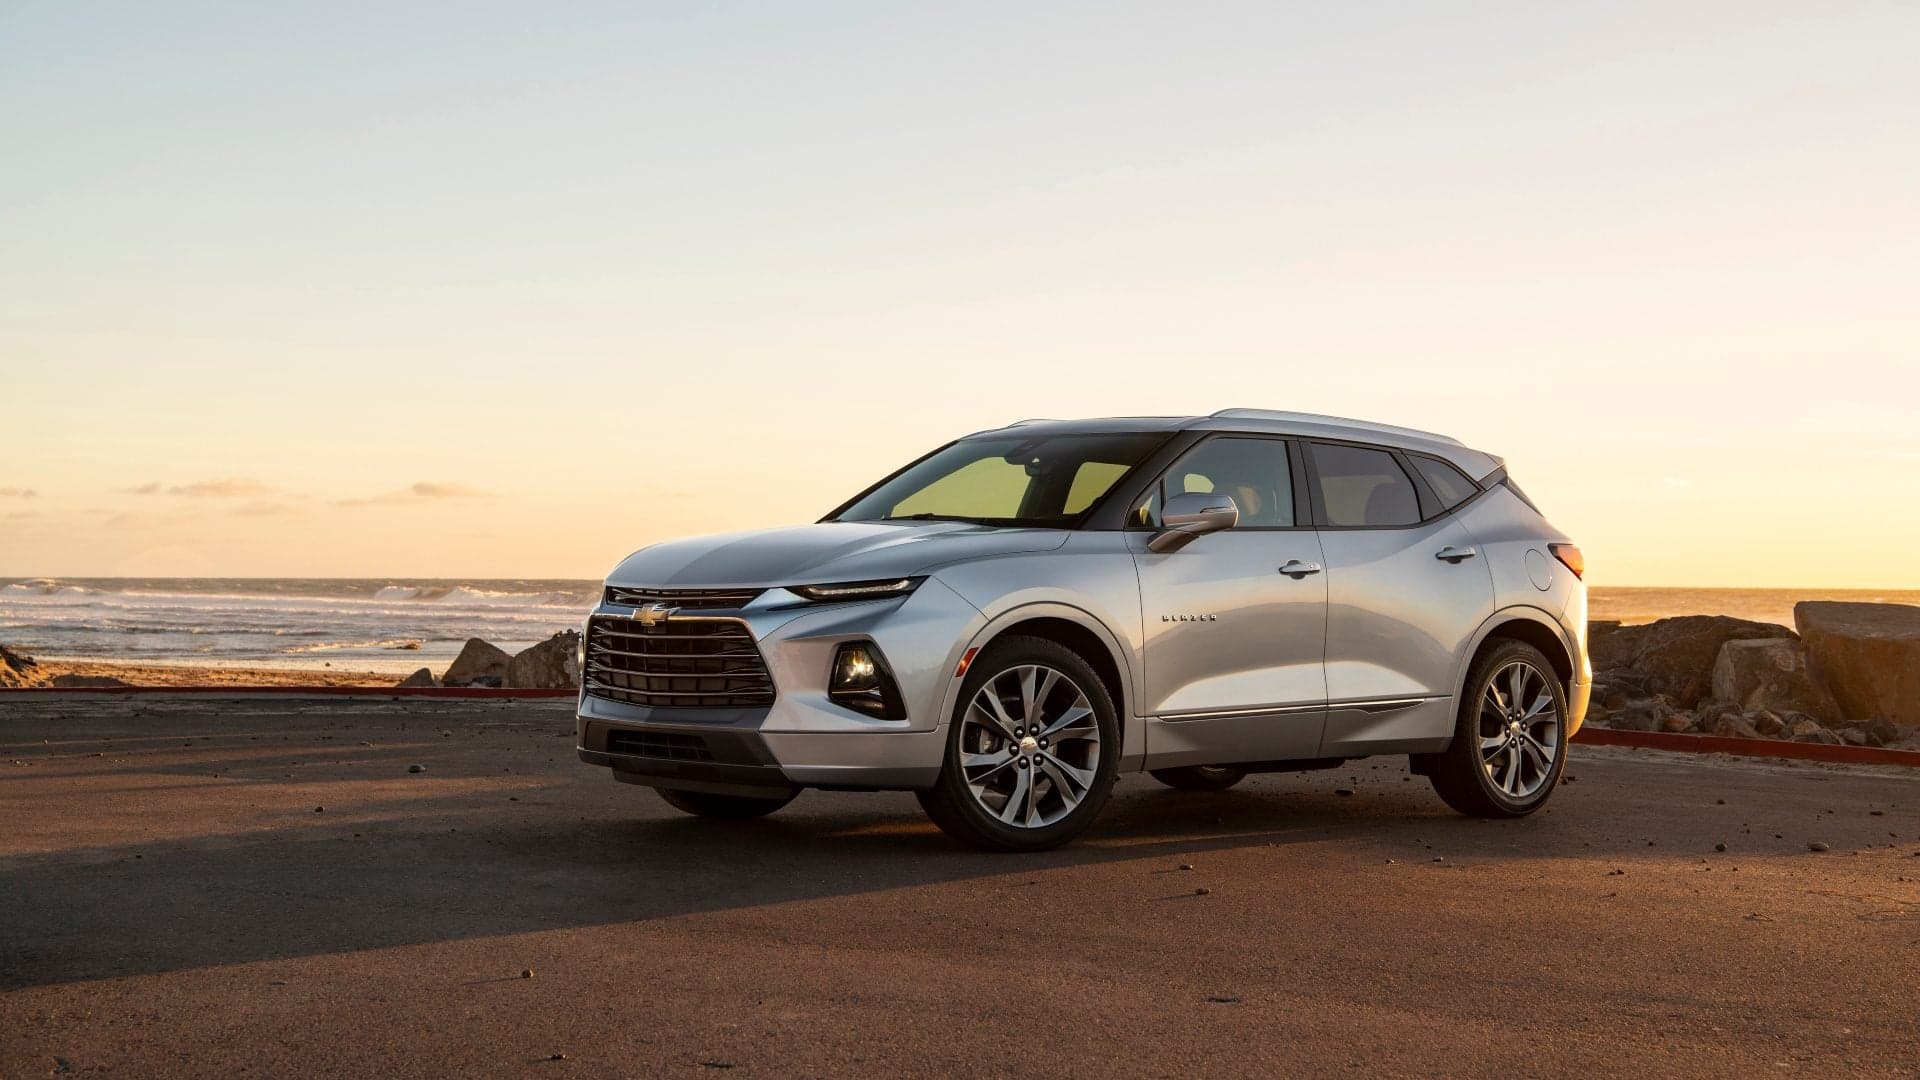 Chevrolet Blazer Production Halted in Mexico Over UAW Strike-Related Parts Shortage